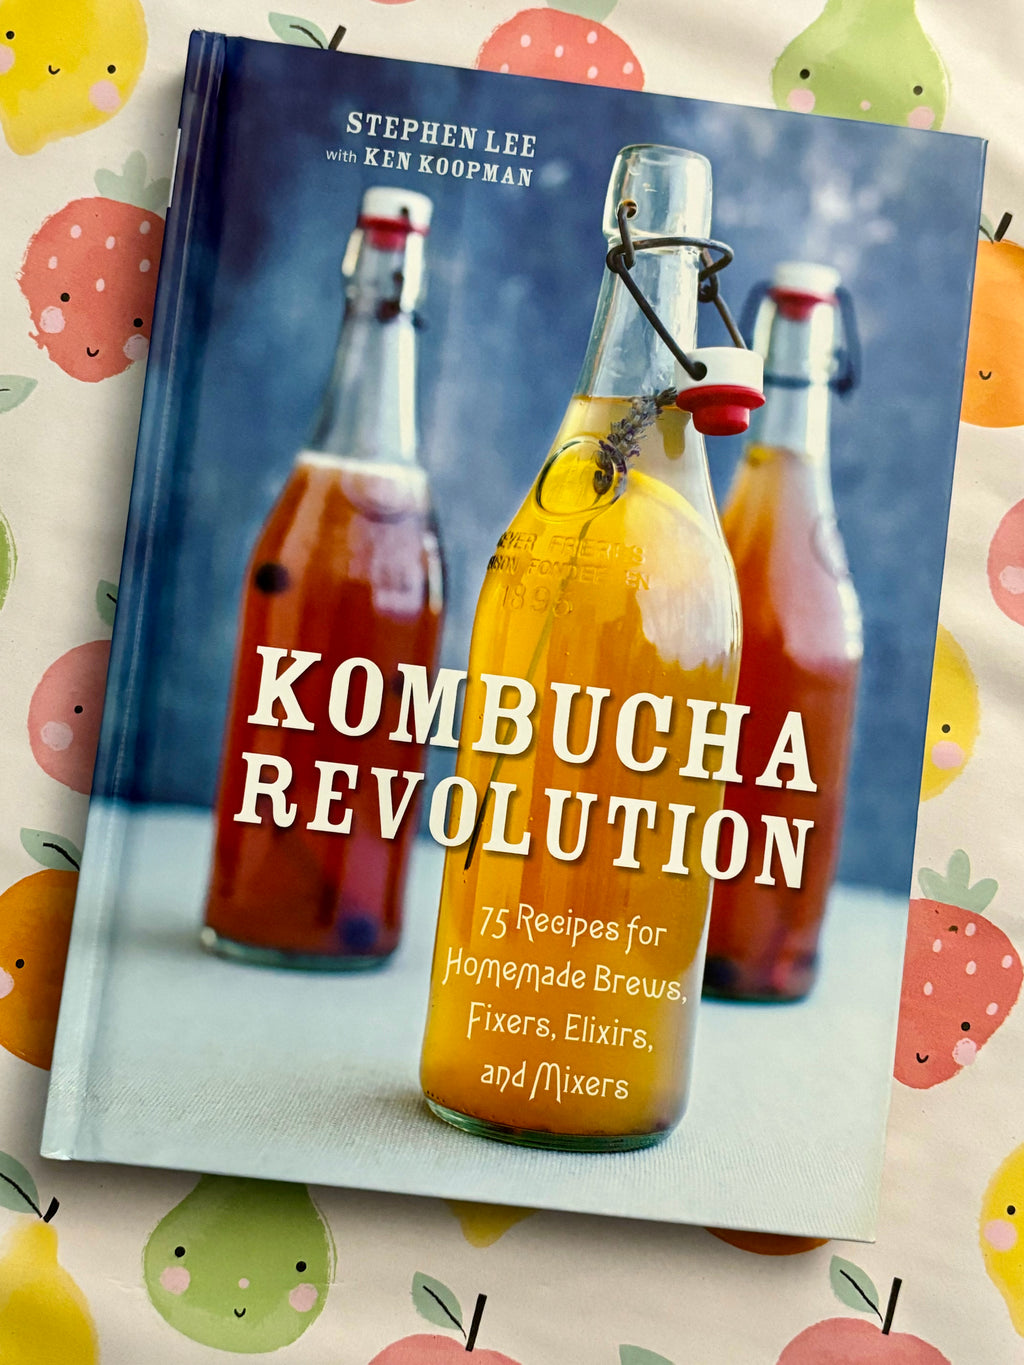 Kombucha Revolution: 75 Recipes for Homemade Brews, Fixers, Elixirs and Mixers- By Stephen Lee